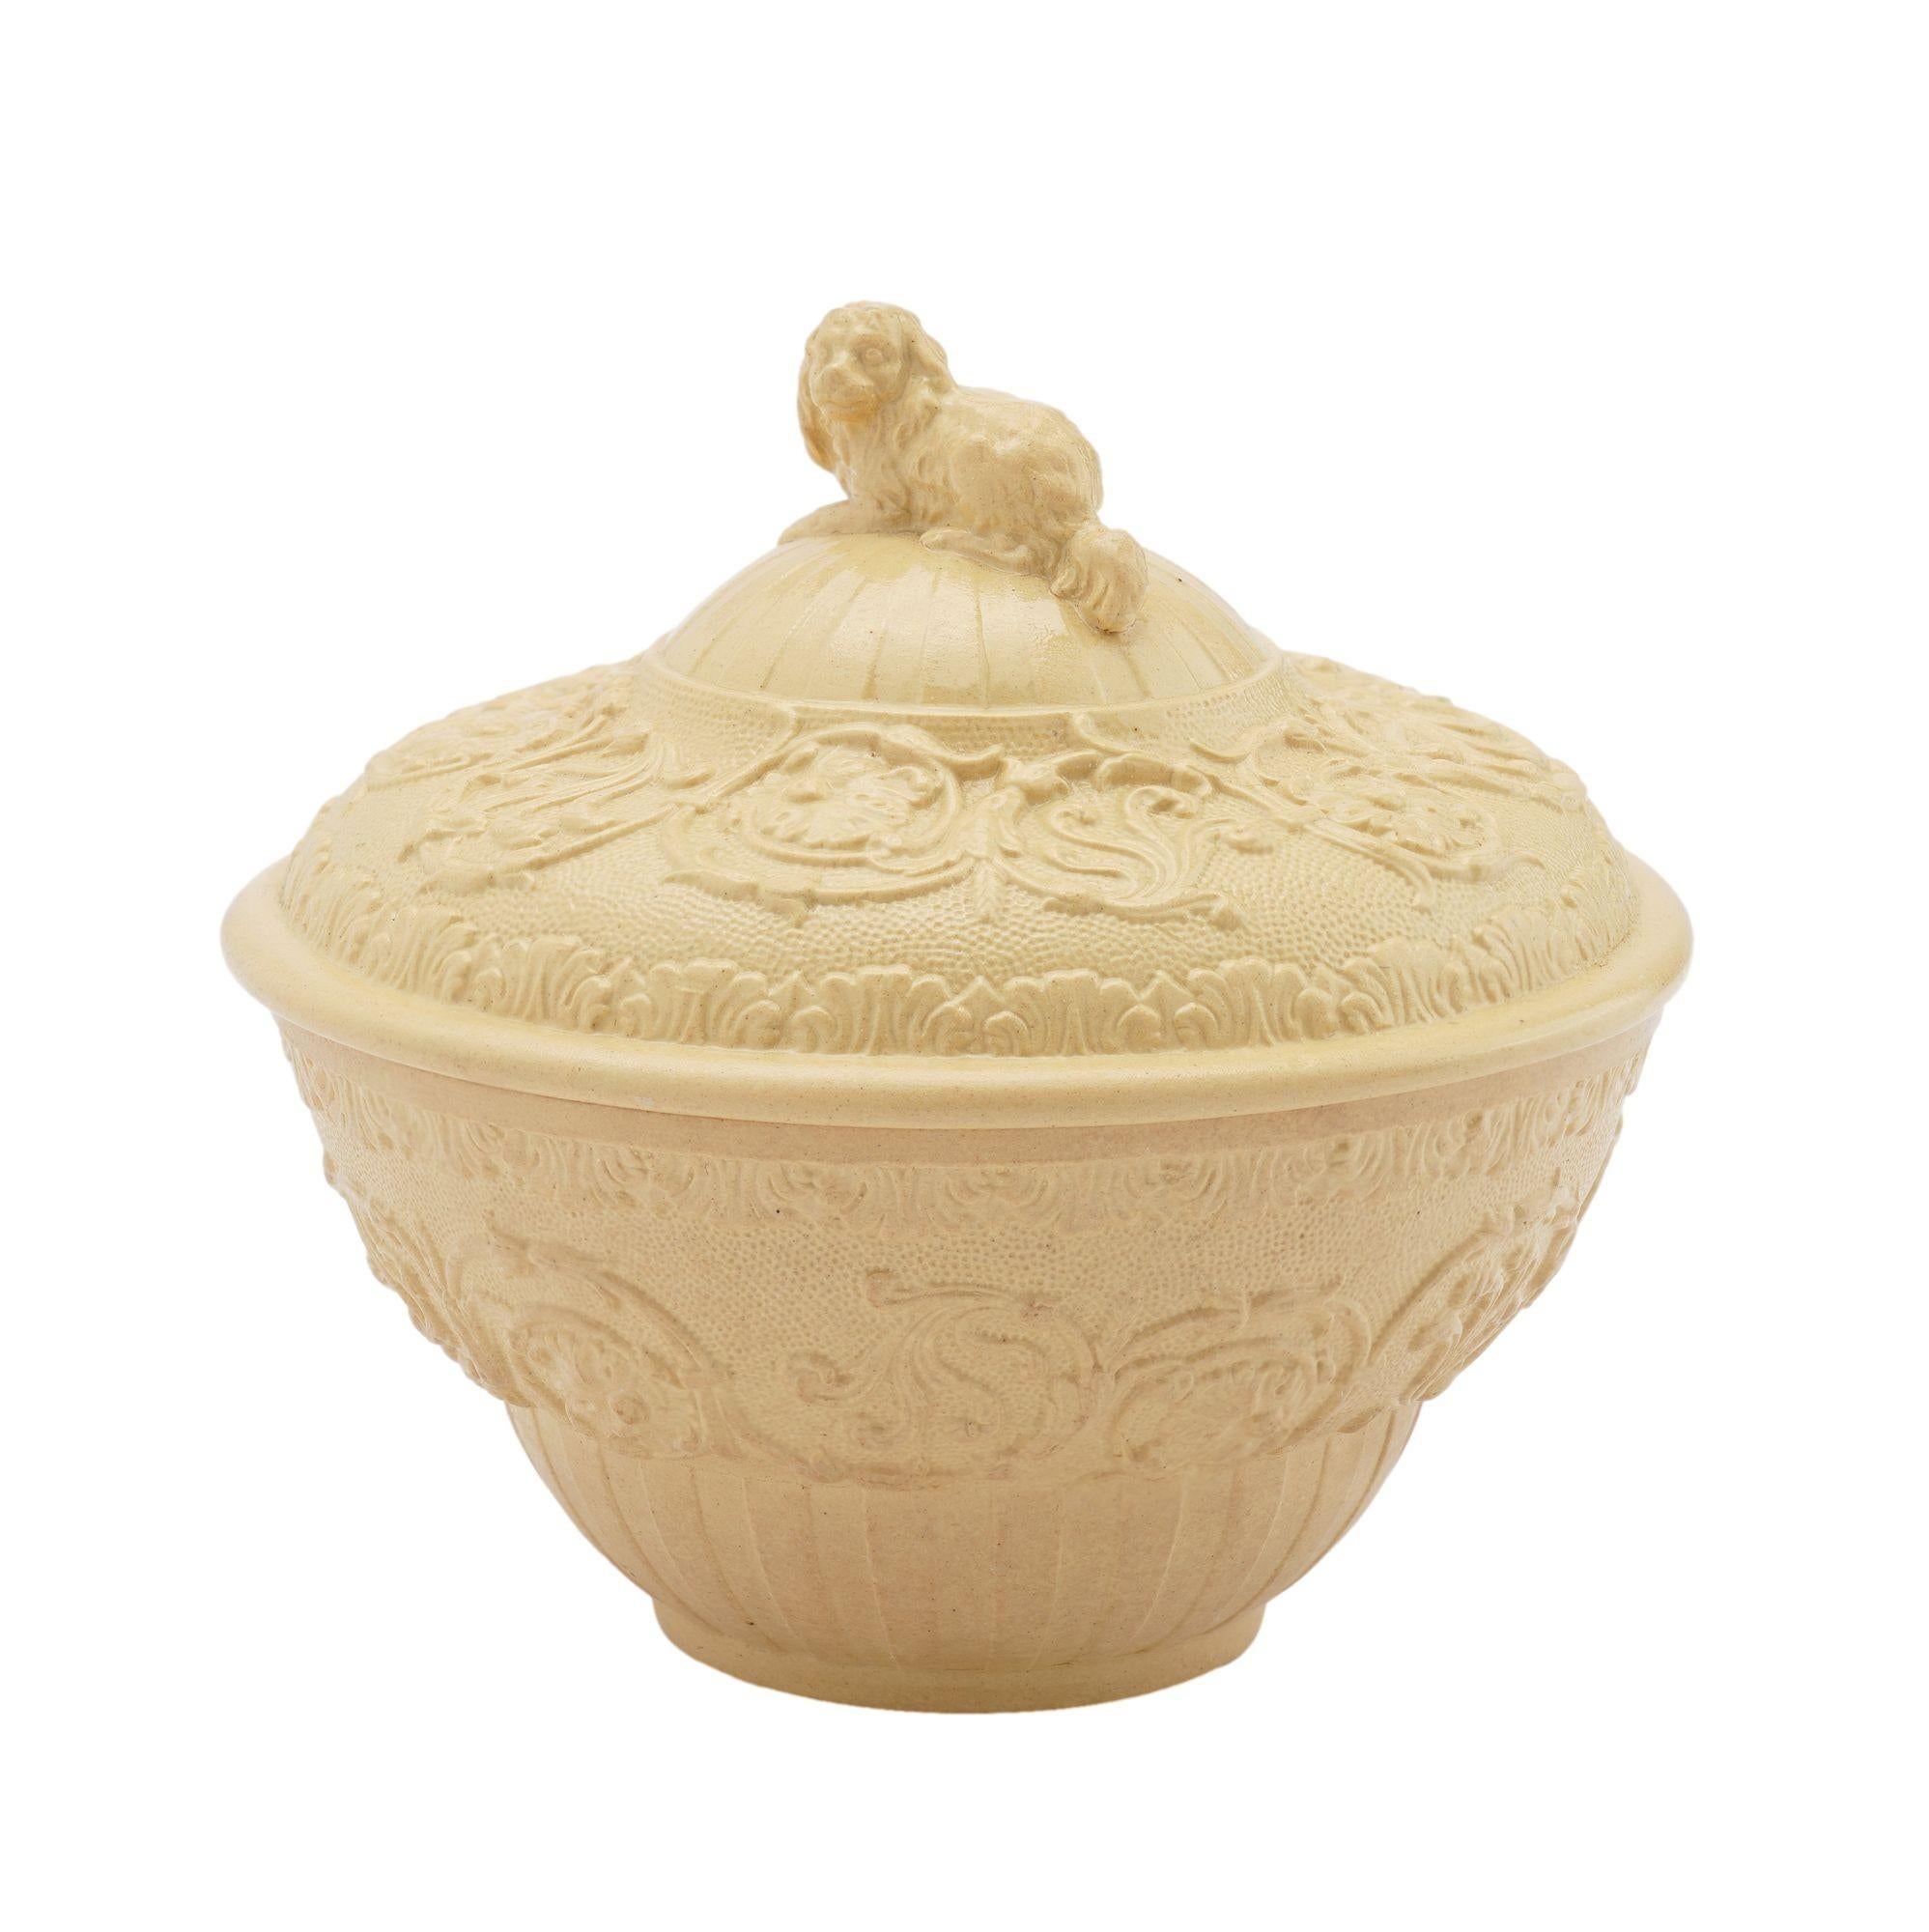 Caneware ceramic sugar bowl with cover and raised pattern surface decoration and a King Charles spaniel finial on the cover.
Stamped on the underside: Wedgwood

England, circa 1815-20.